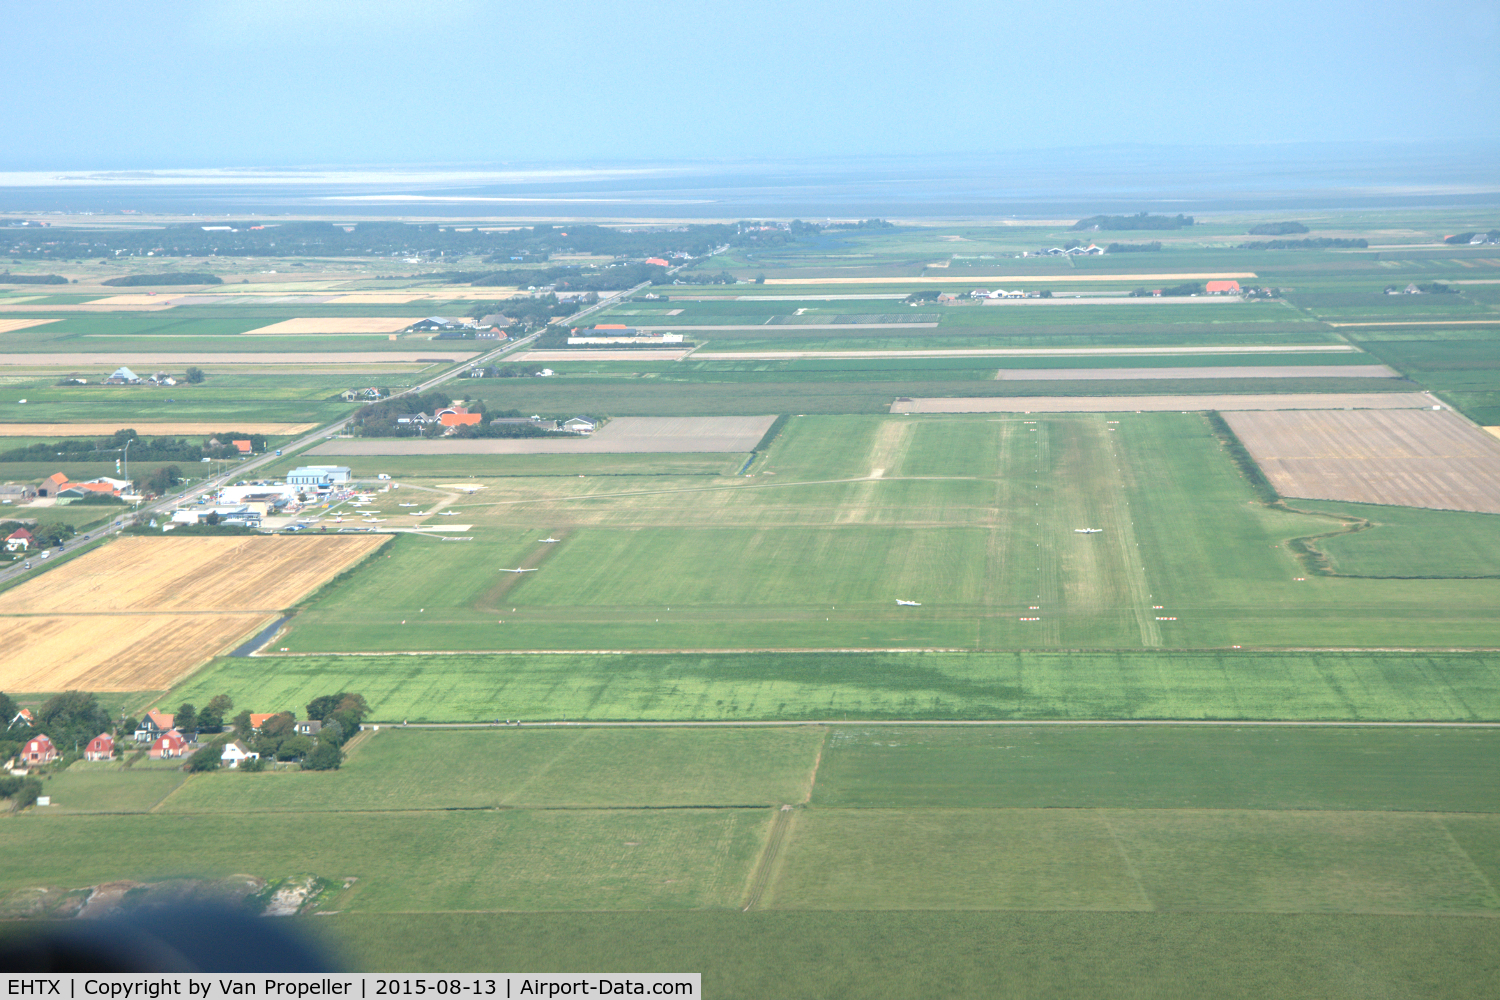 Texel International Airport, Texel Netherlands (EHTX) - Texel airfield seen during approach from the southern side: the friendliest airfield in the Netherlands...